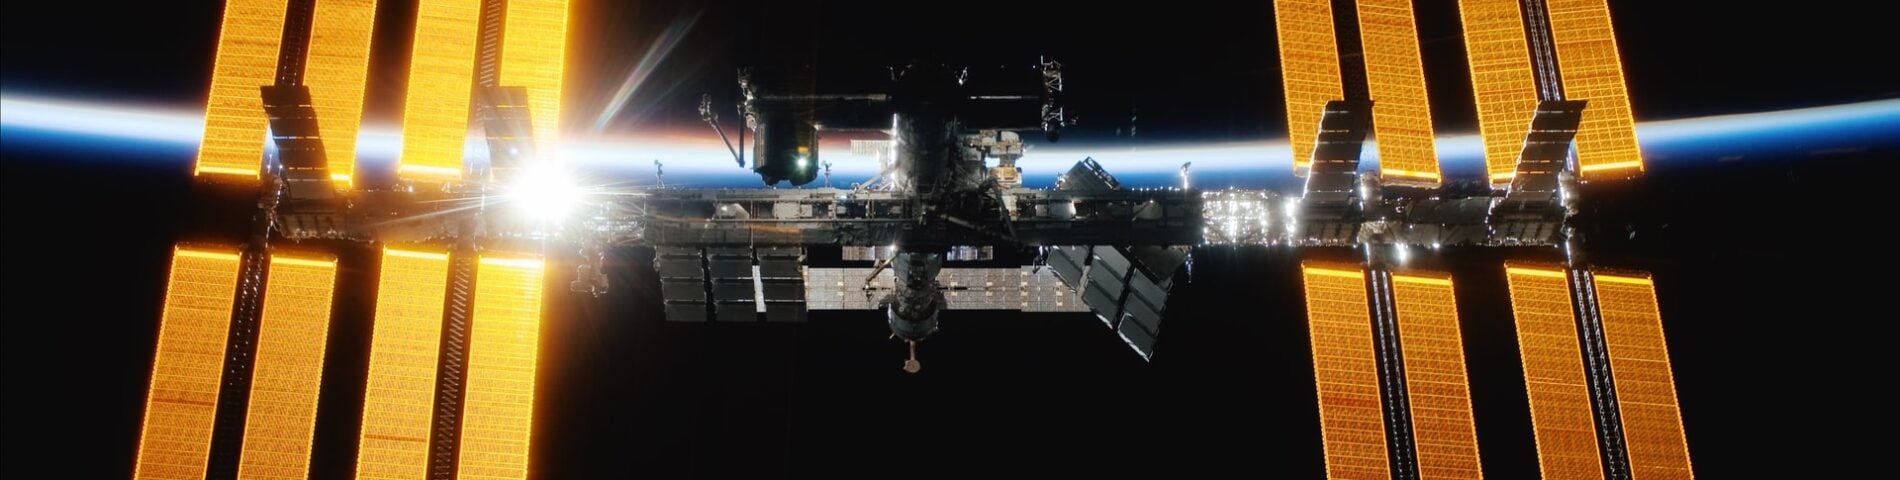 The International Space Station (ISS)